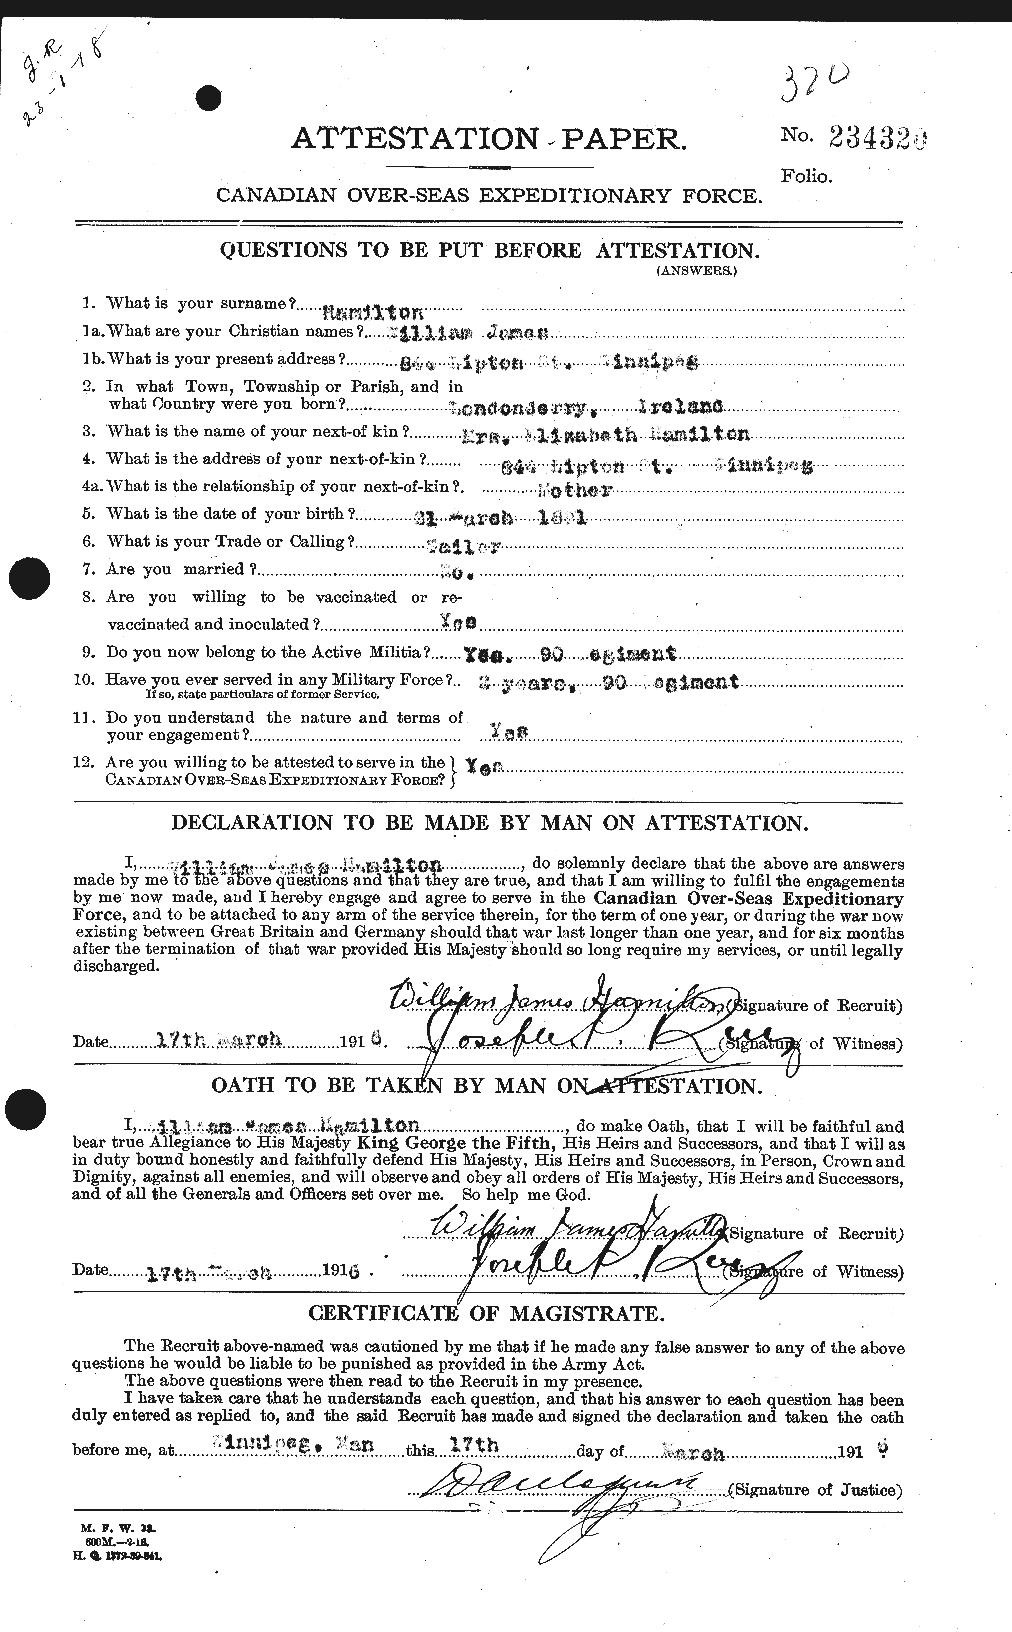 Personnel Records of the First World War - CEF 374904a